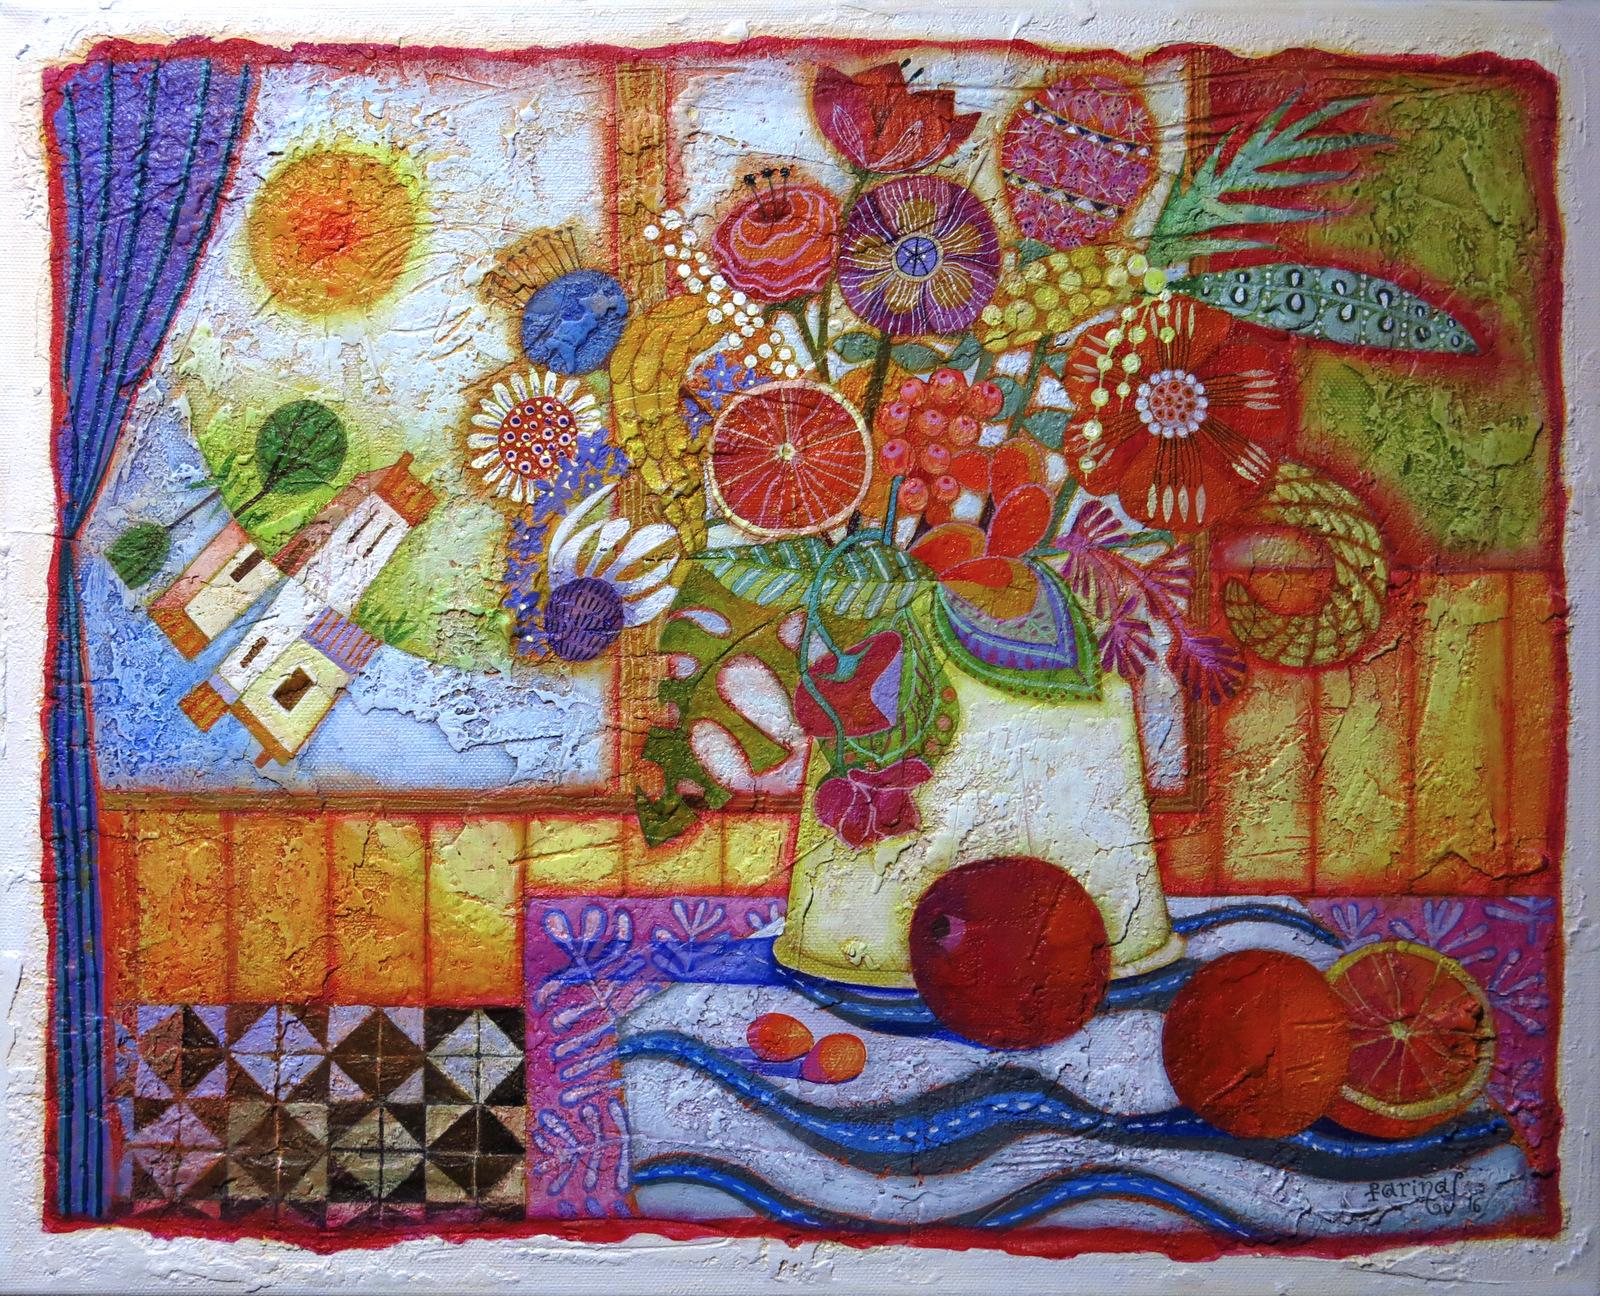 It's Light. Colorful interior with still-live. Acrylic on panel Folk Art - Painting by Raquel Fariñas